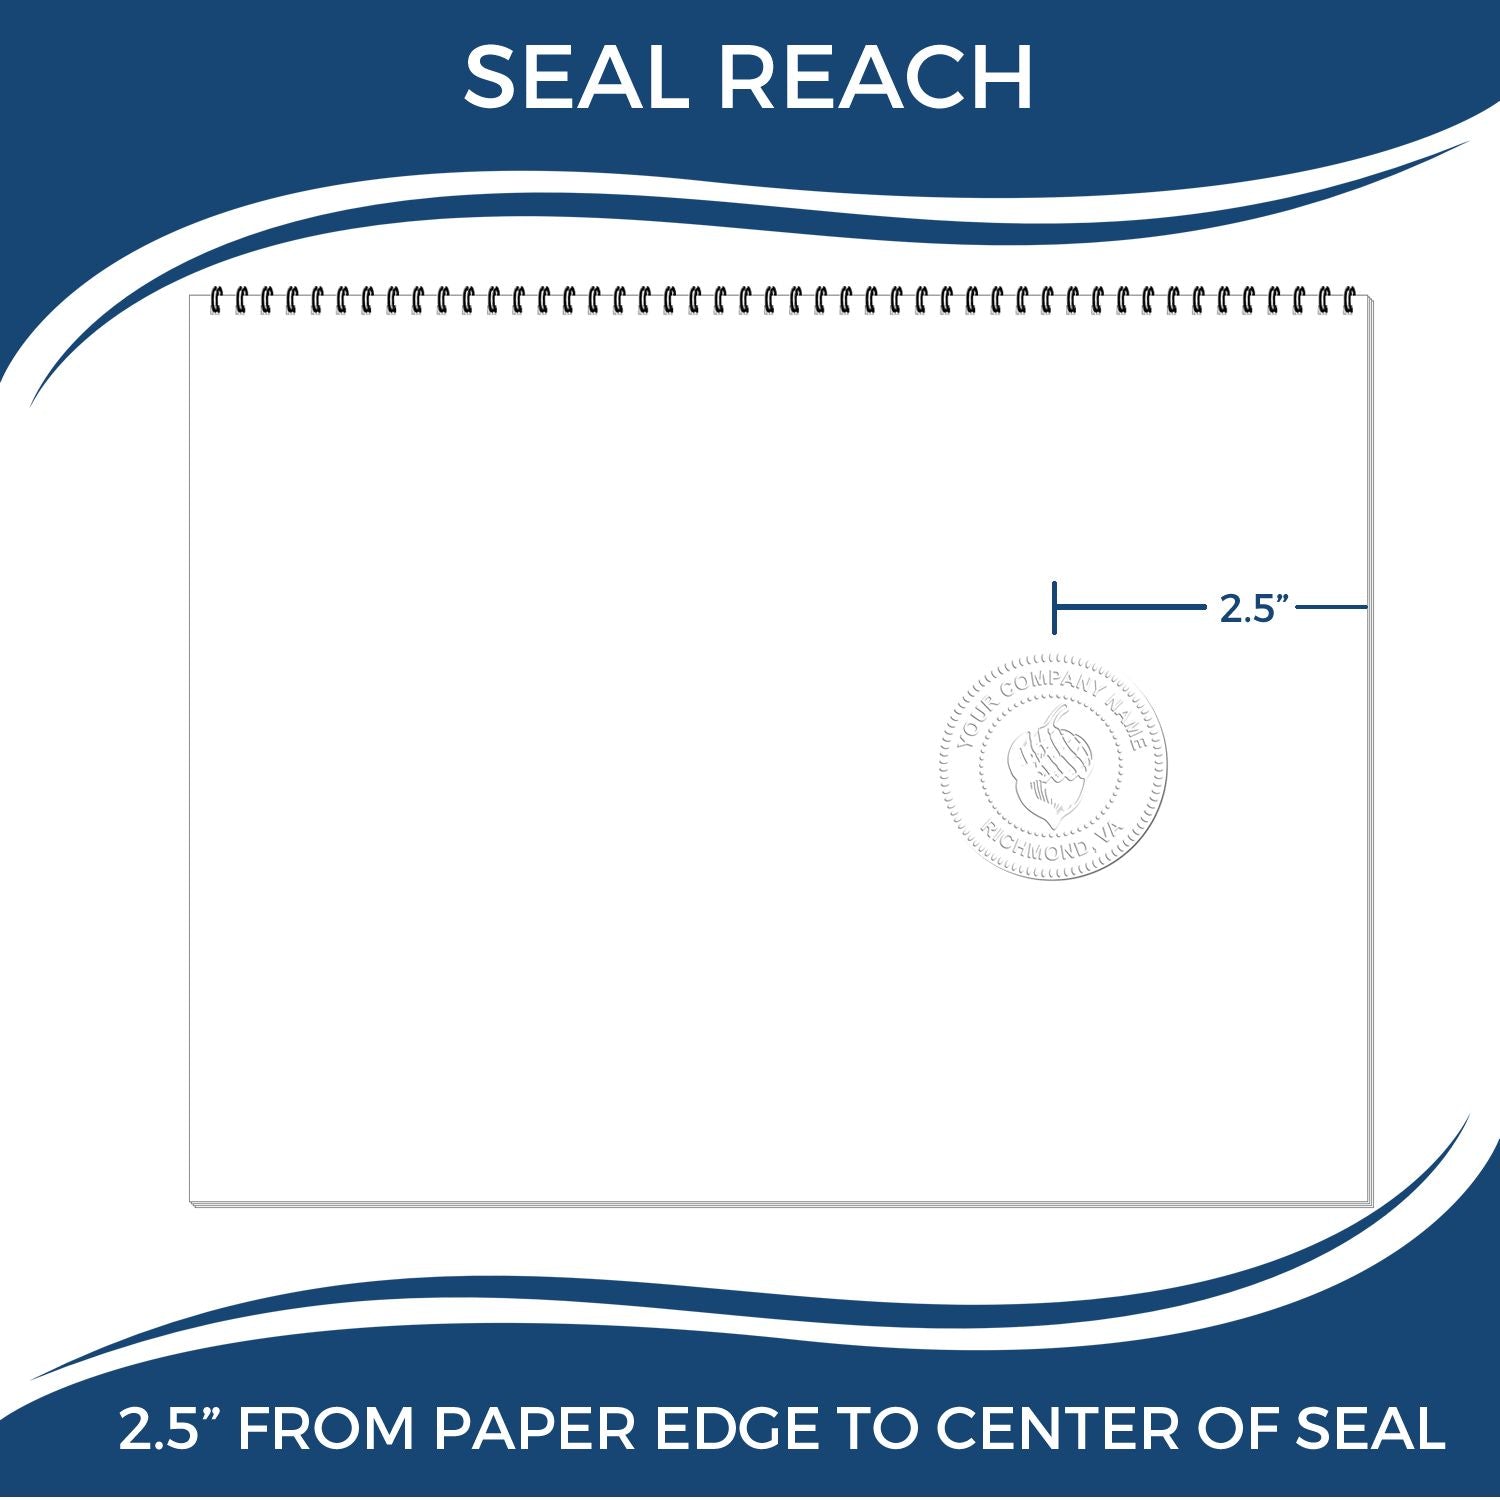 An infographic showing the seal reach which is represented by a ruler and a miniature seal image of the Long Reach Massachusetts Geology Seal